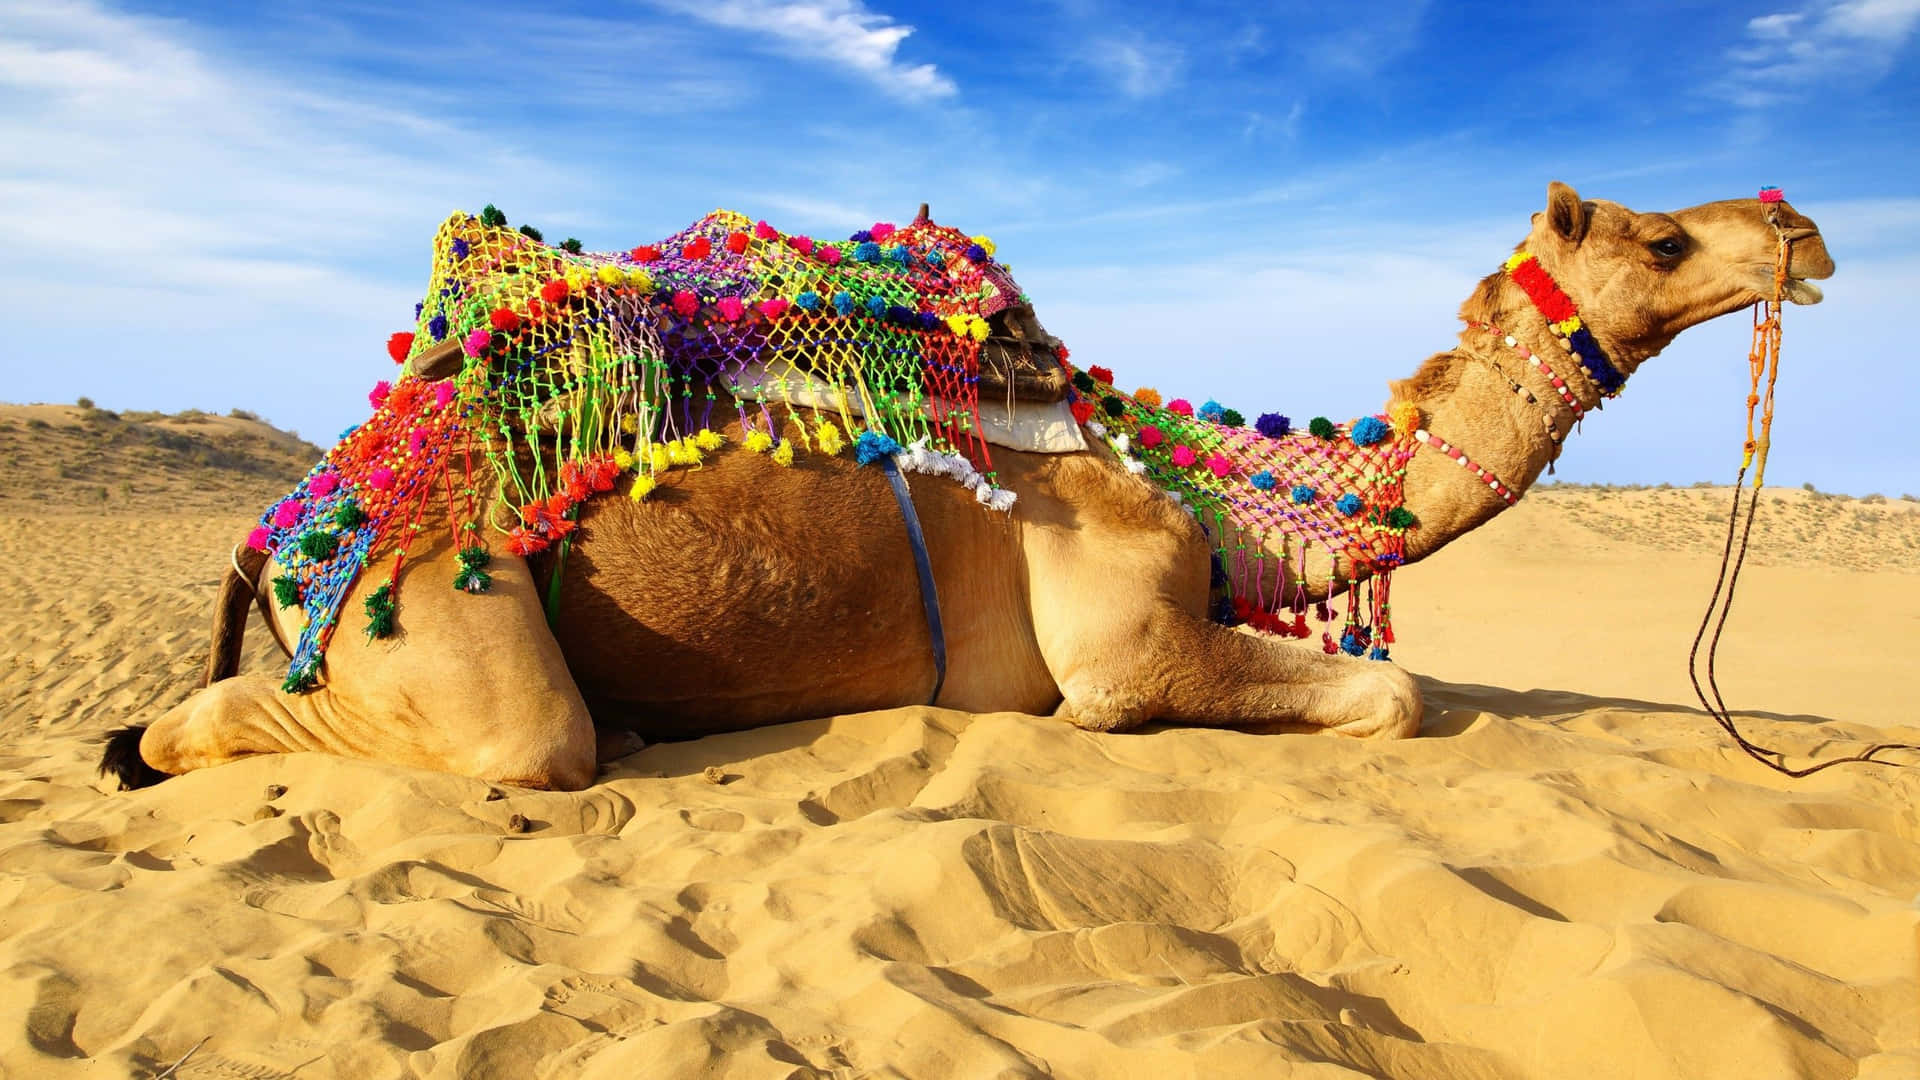 Enjoy The Beauty of Camel in Nature